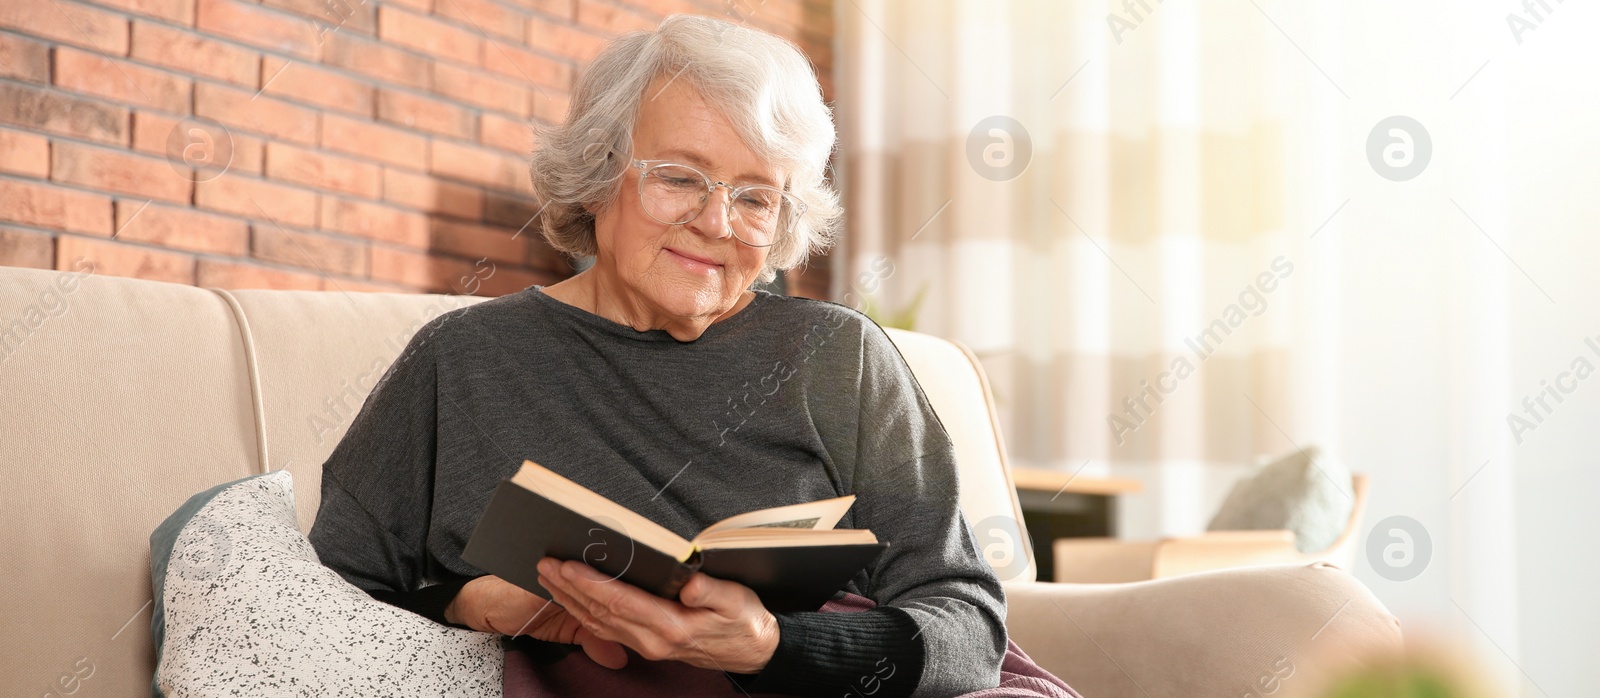 Image of Elderly woman reading book on sofa in living room. Banner design